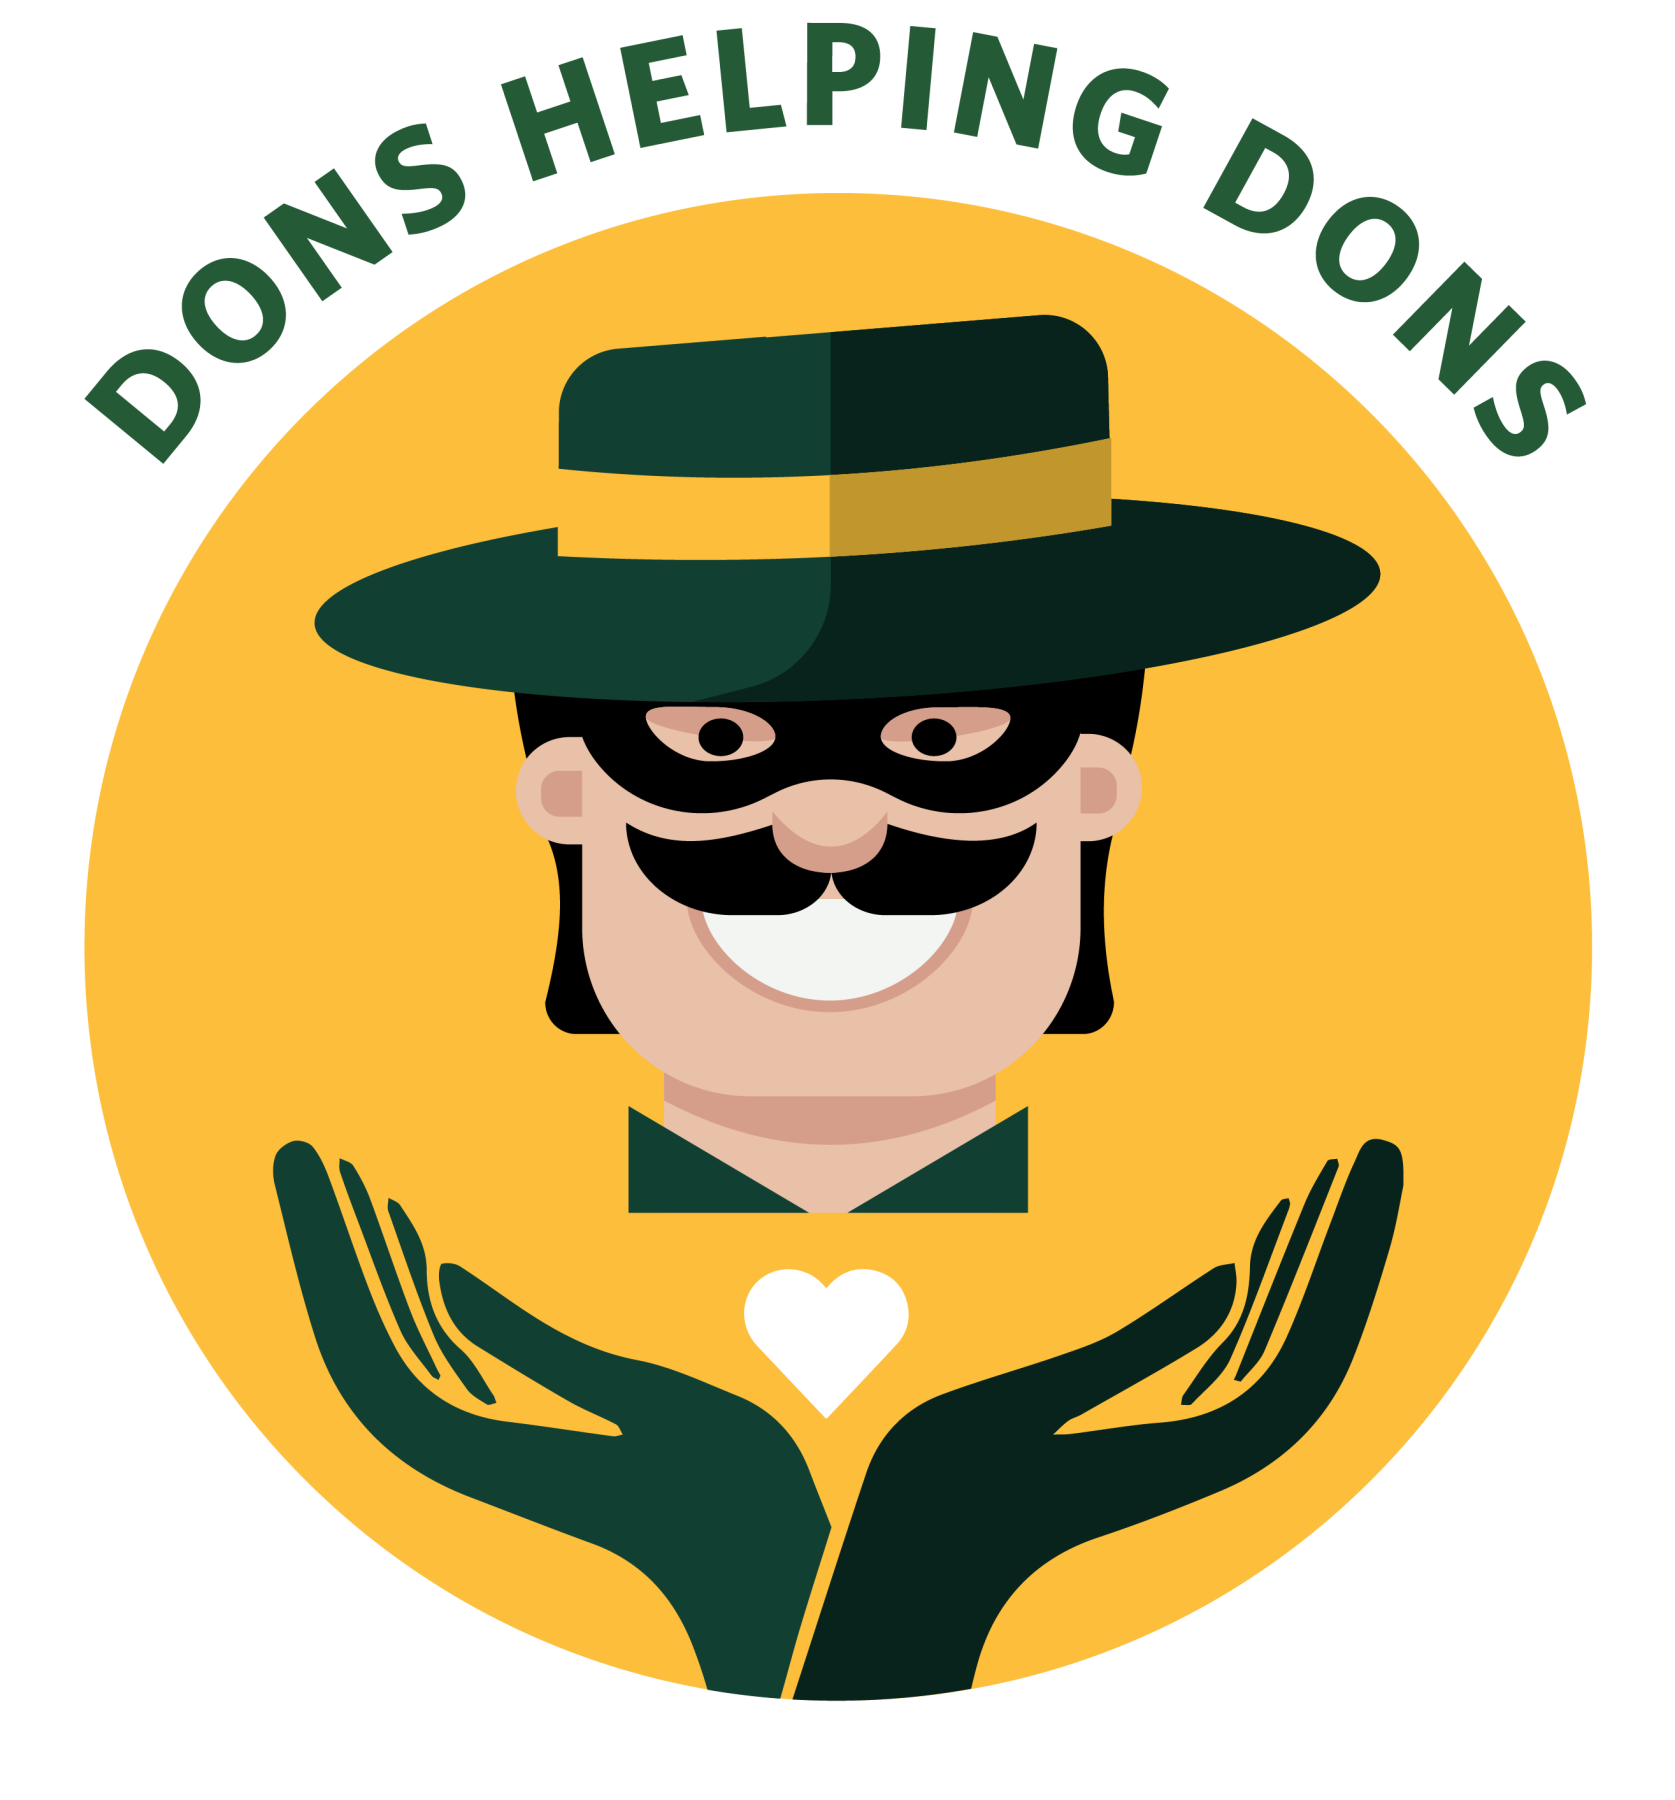 Dons Helping Dons Logo